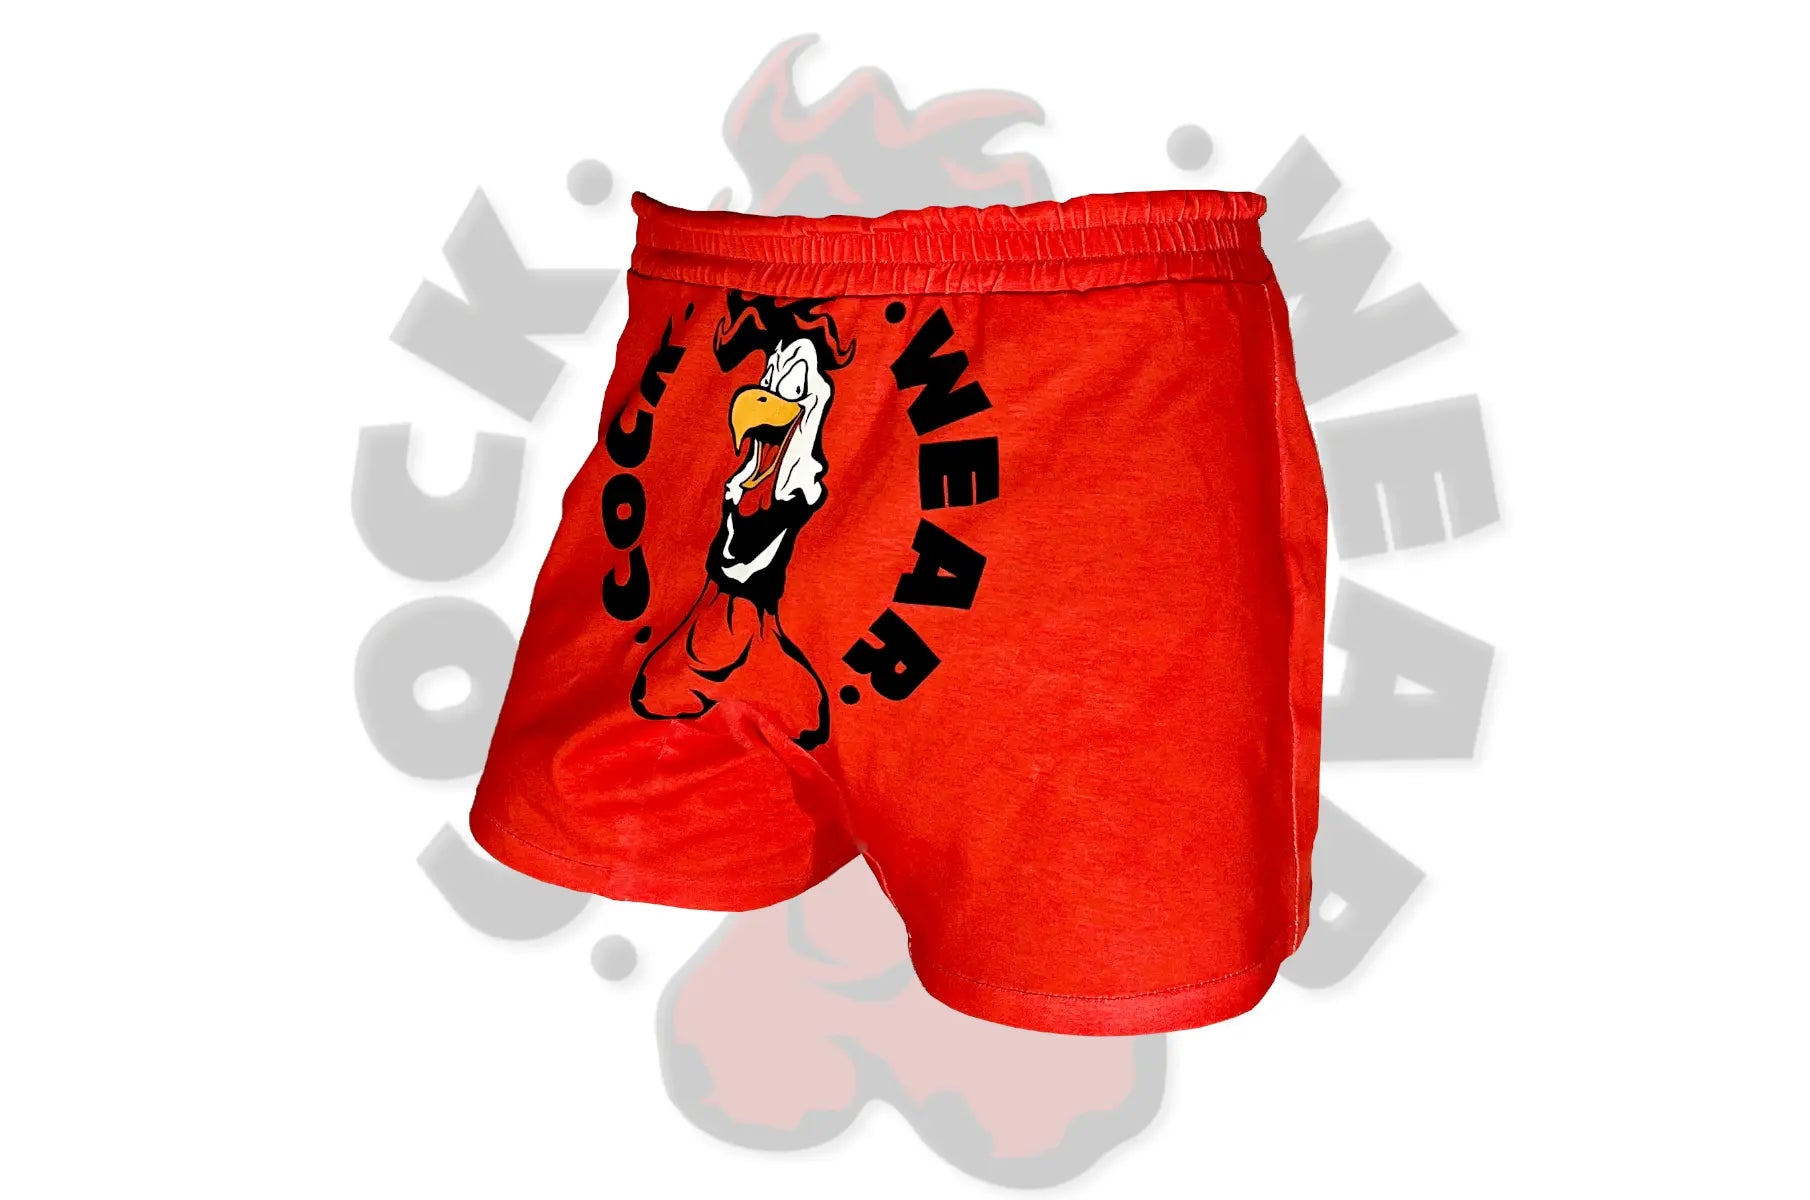 RED COCK WEAR™ + COCK WEAR™ SHORTS PACK